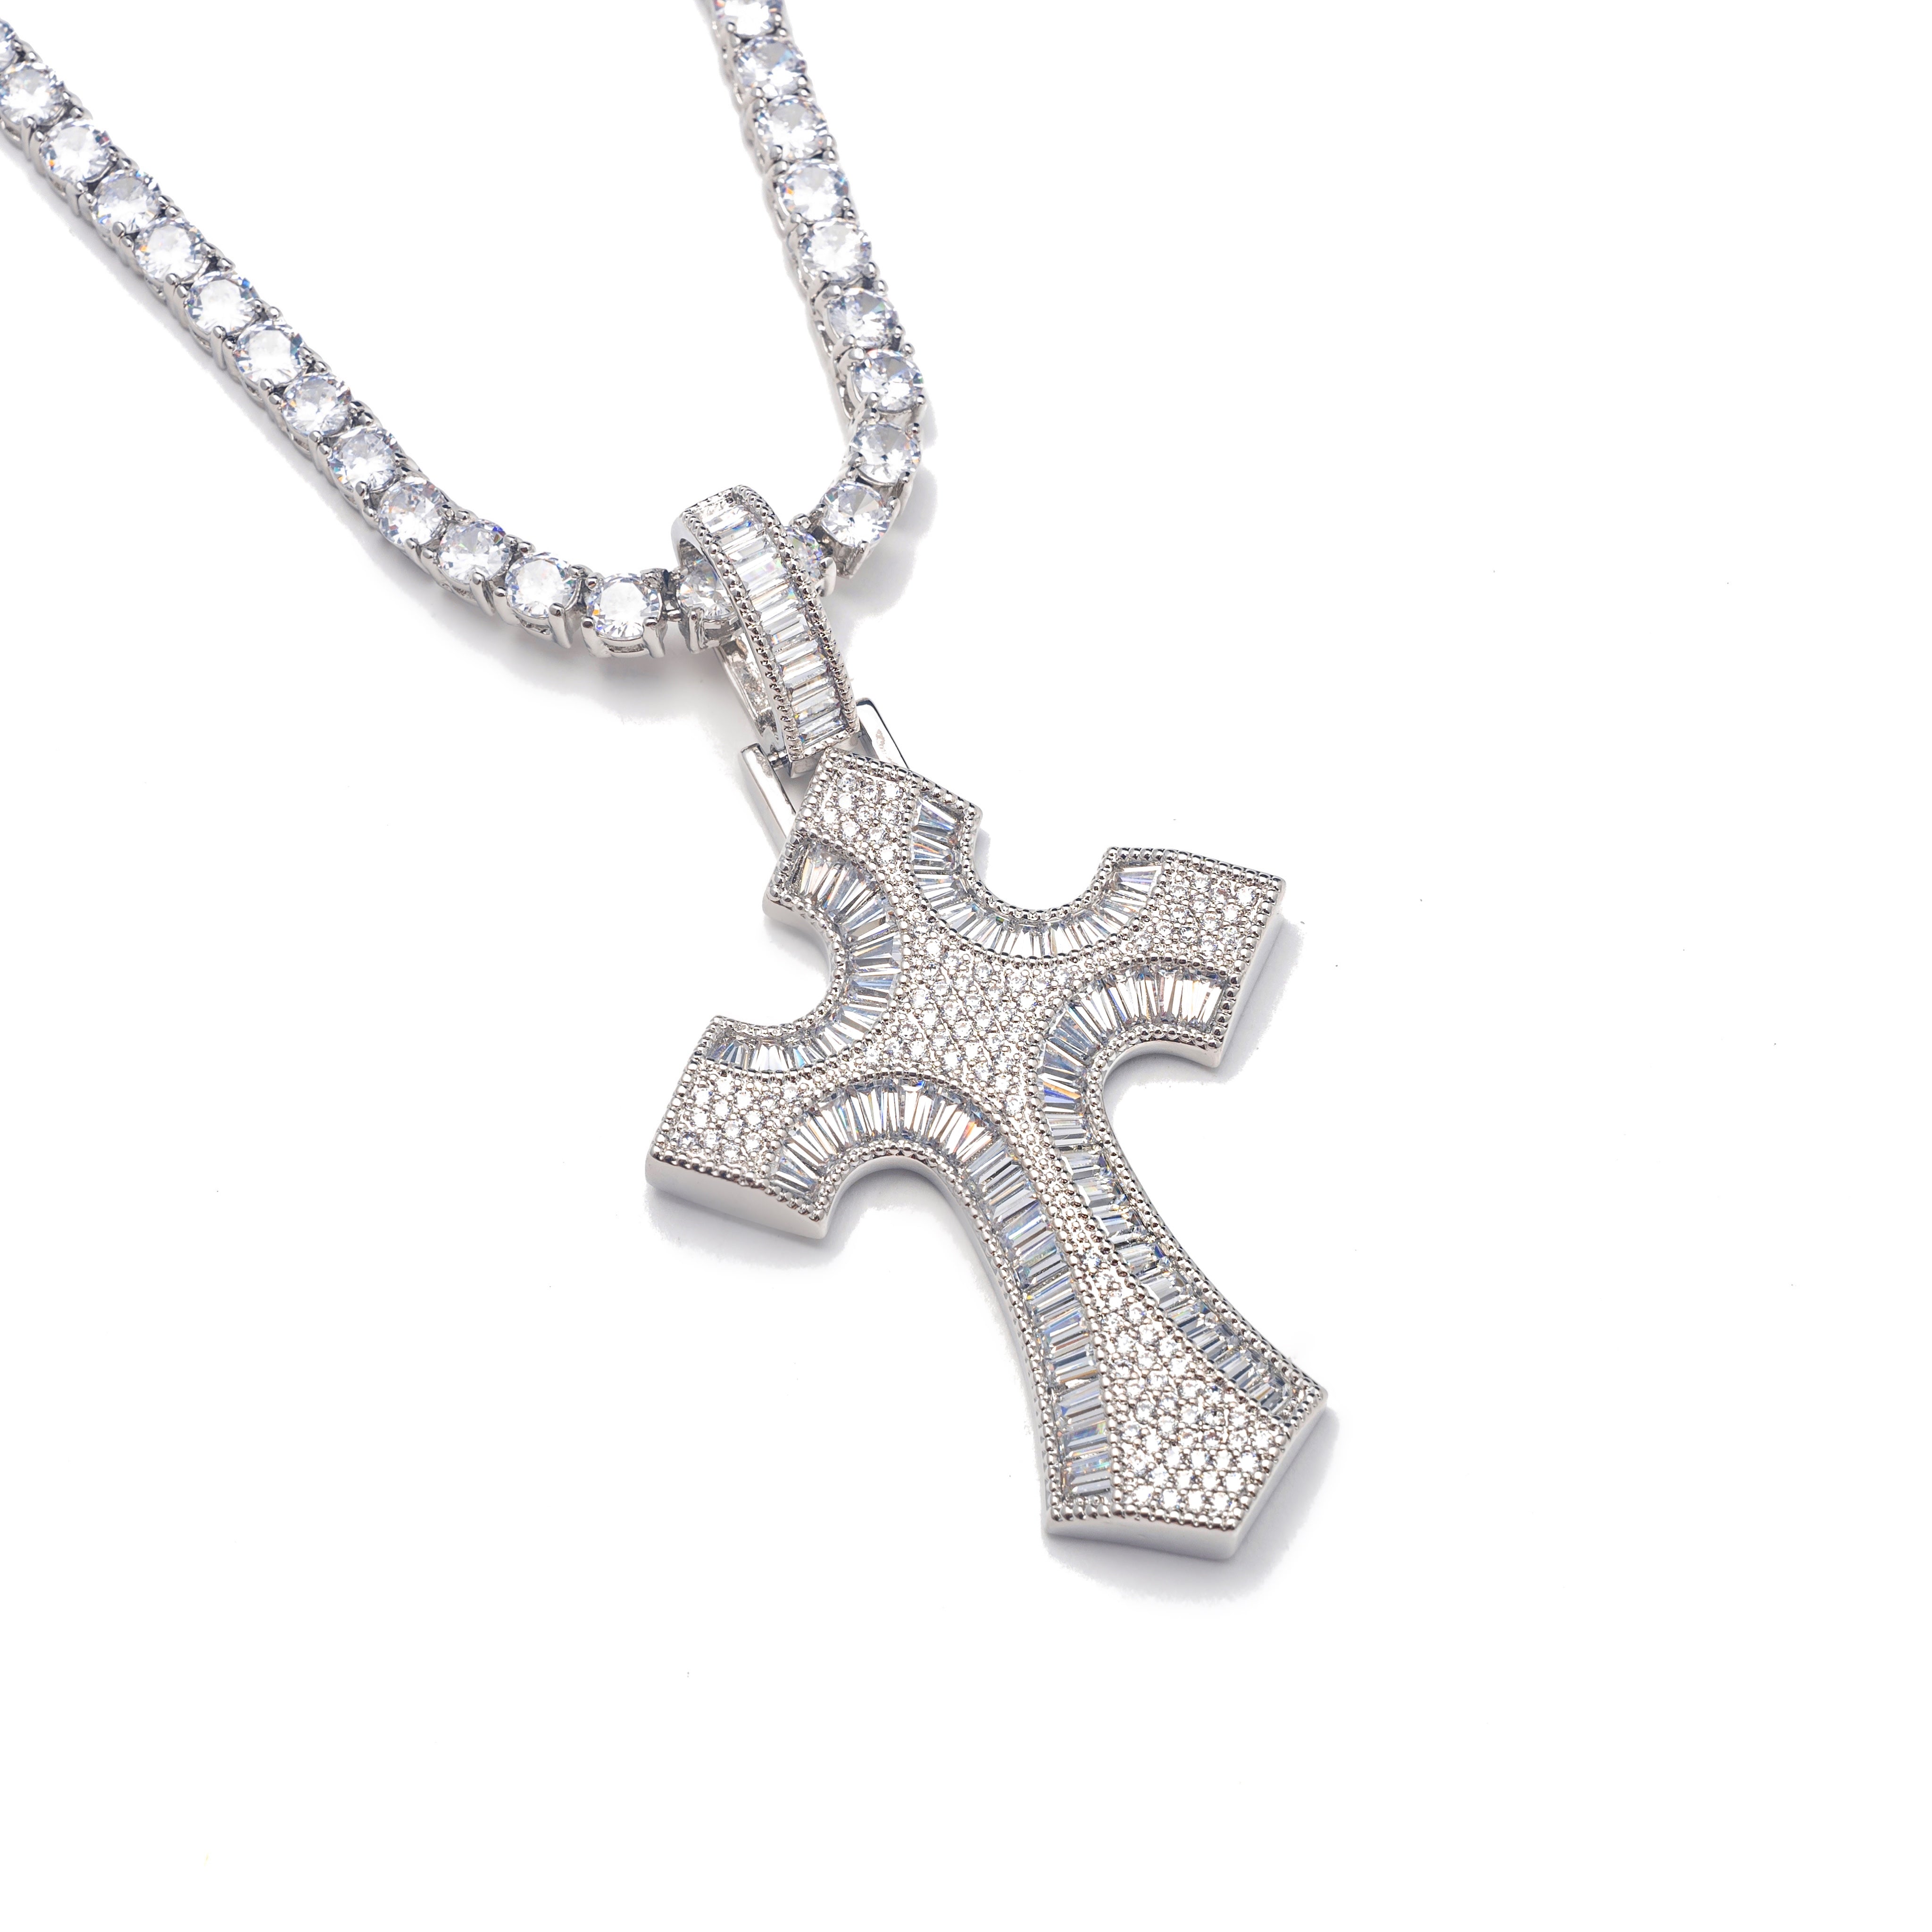 SILVER GOTHIC CROSS NECKLACE – ByLolita